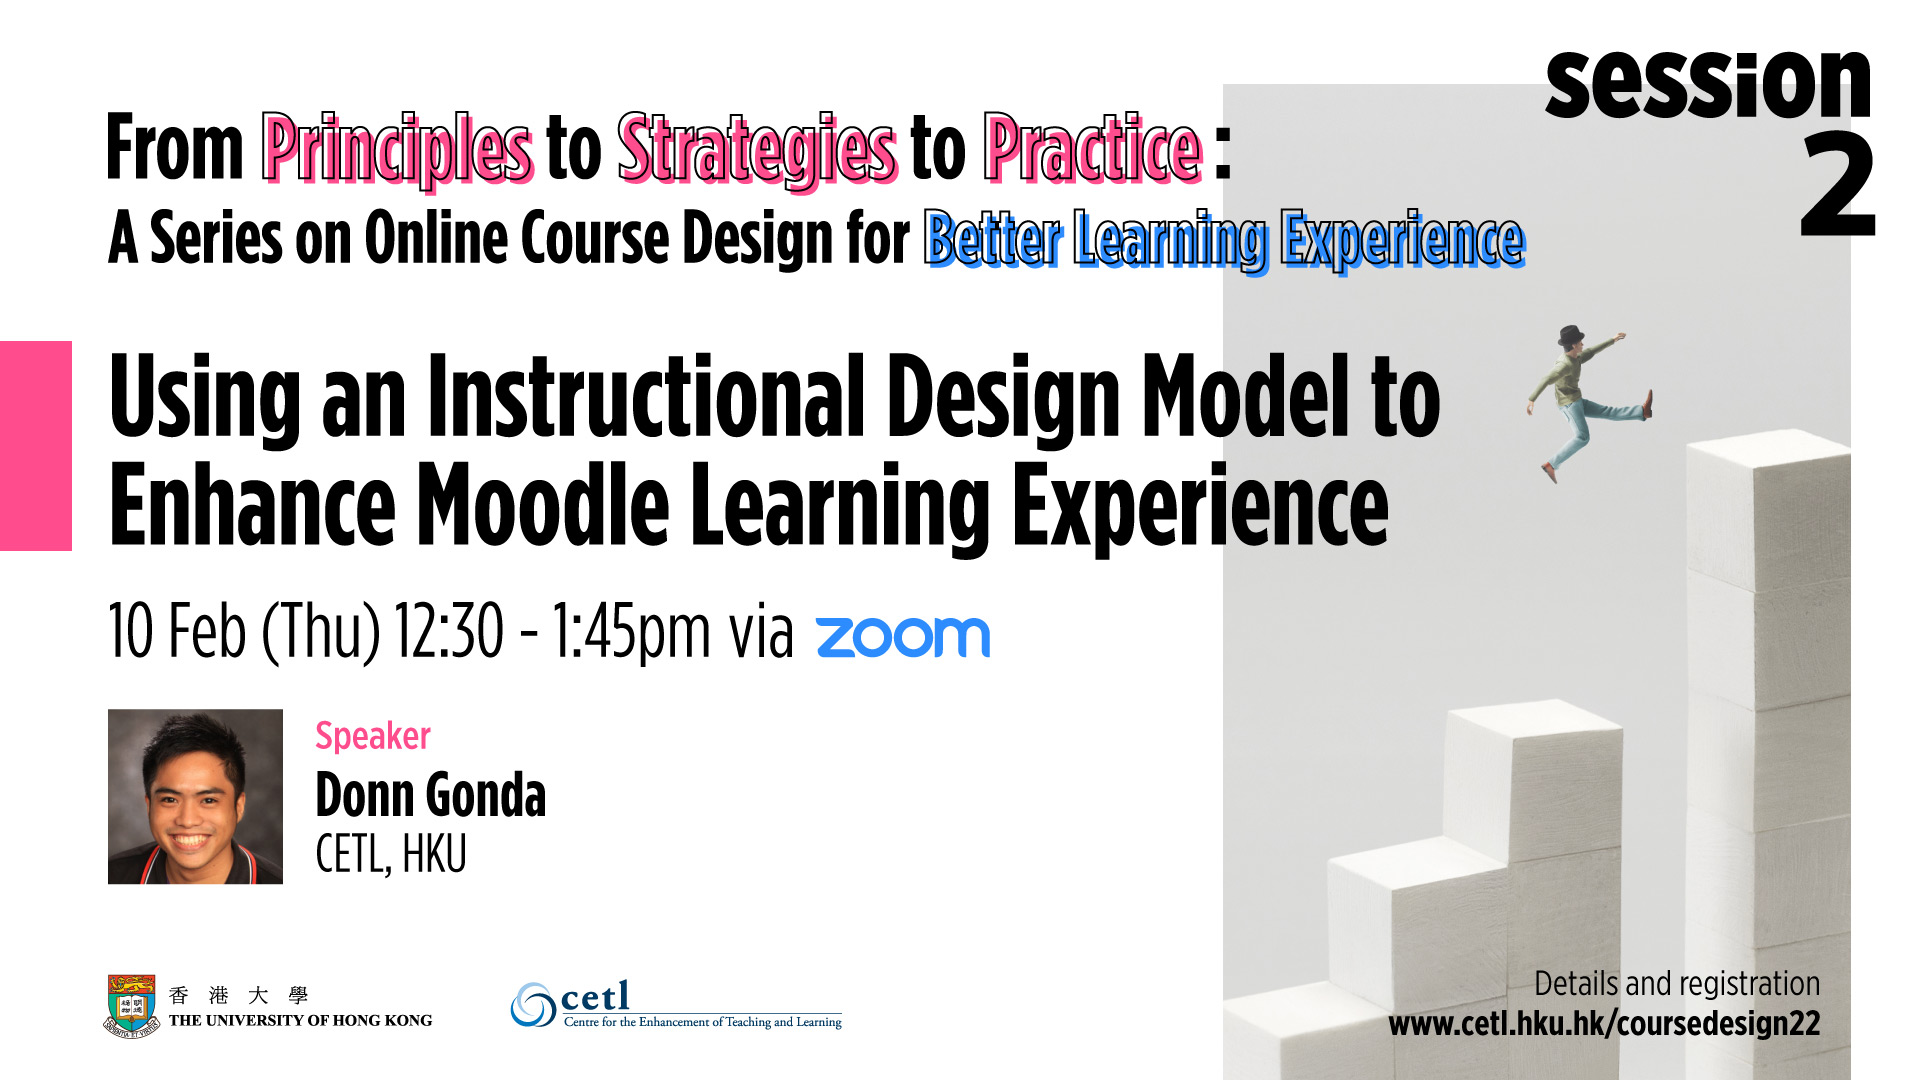 Session 2: Using an Instructional Design Model to Enhance Moodle Learning Experience